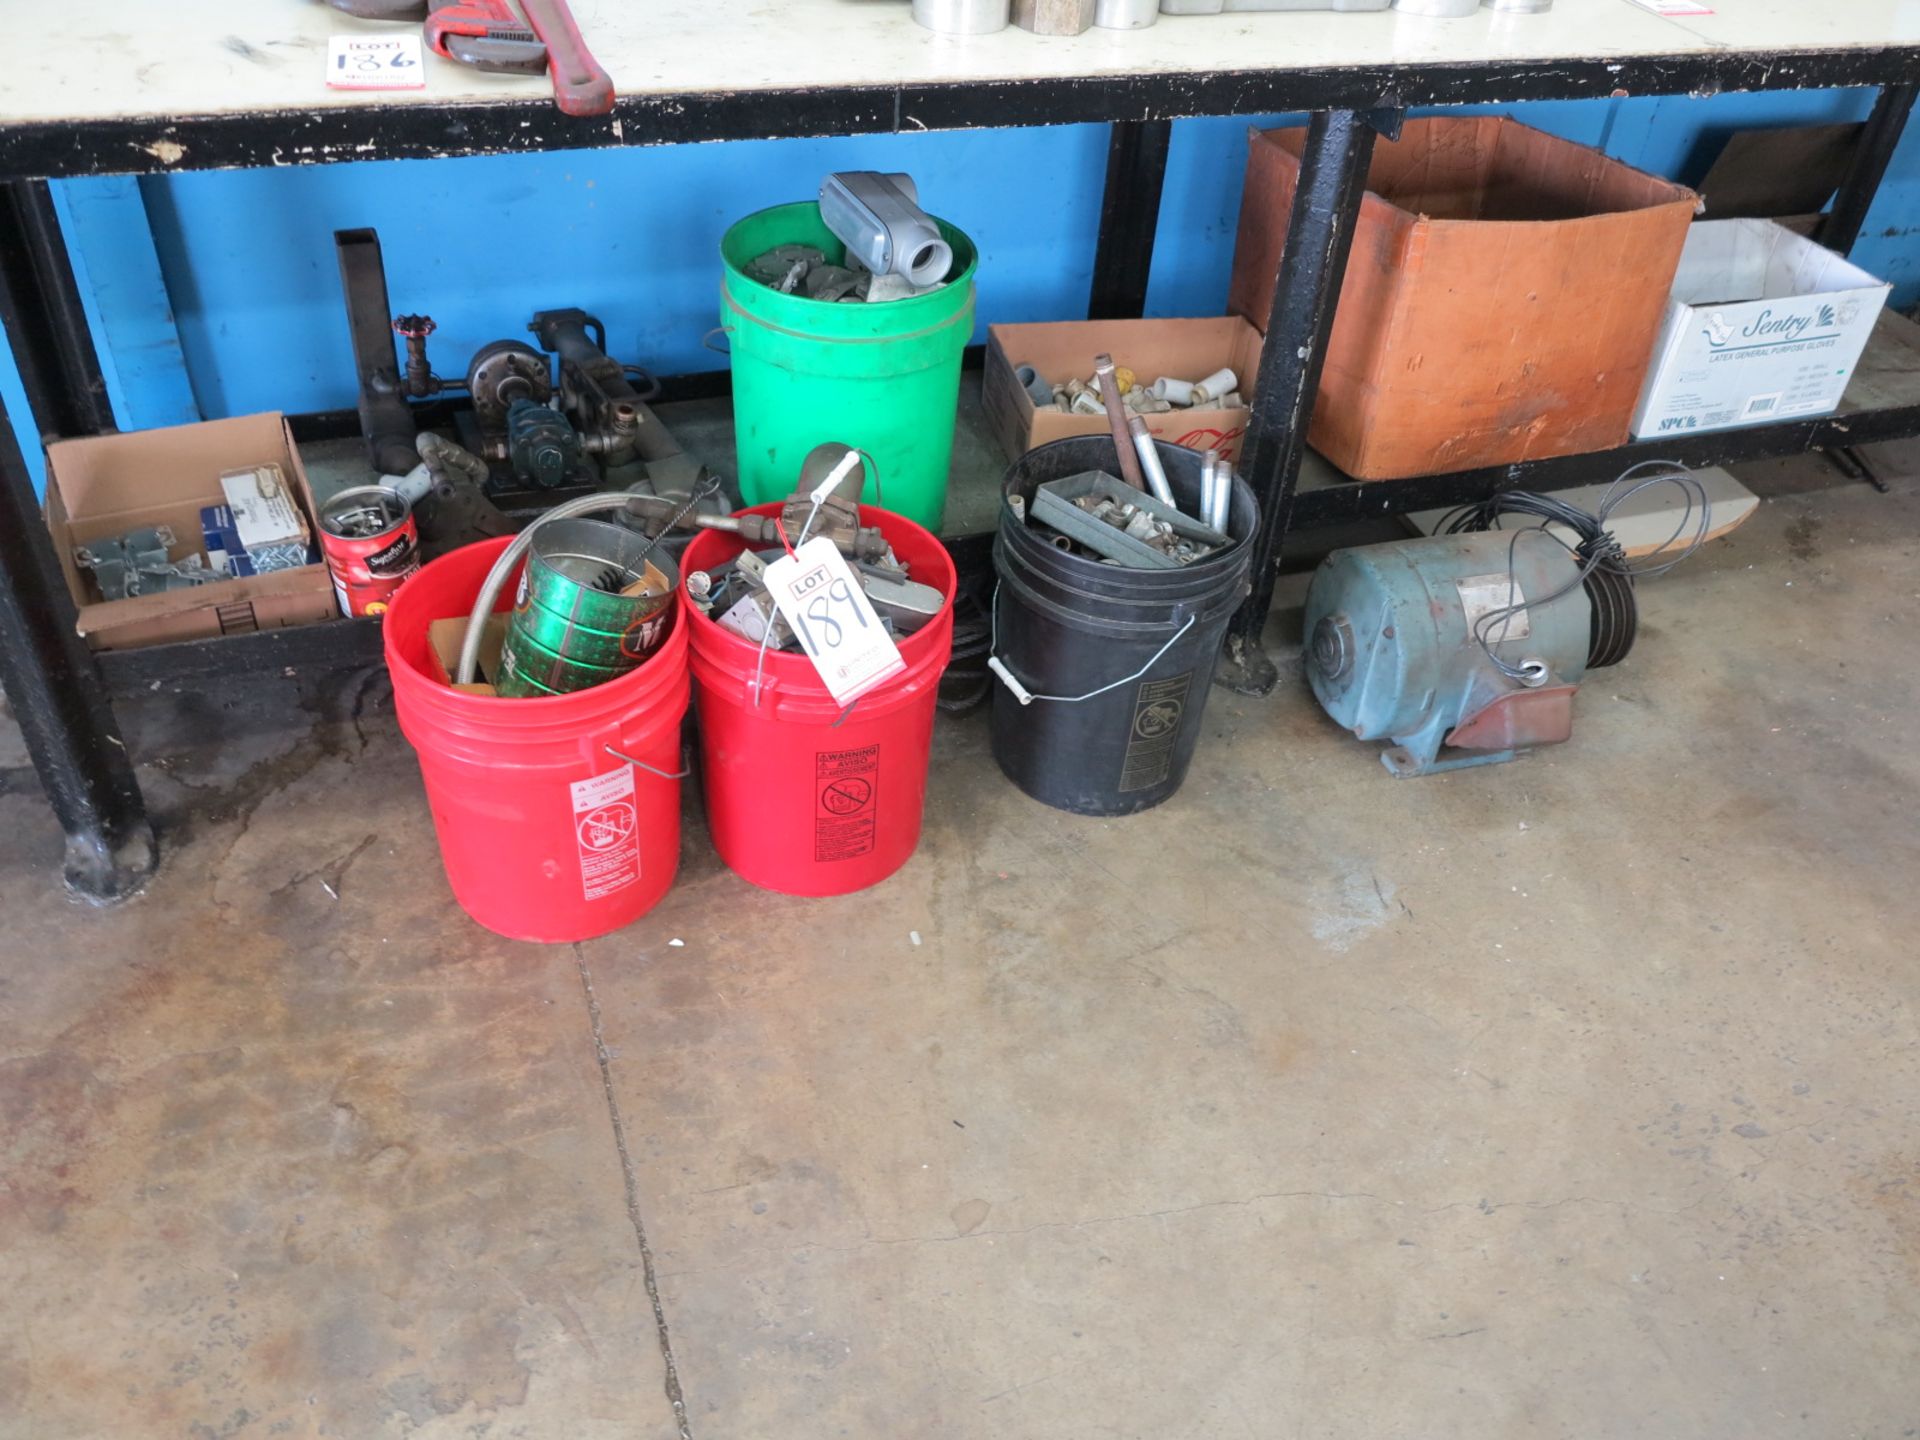 LOT - ASSORTED SHOP MAINTENANCE ITEMS, TO INCLUDE: VALVES, ELECTRICAL, PIPE FITTINGS, BEARINGS, A/